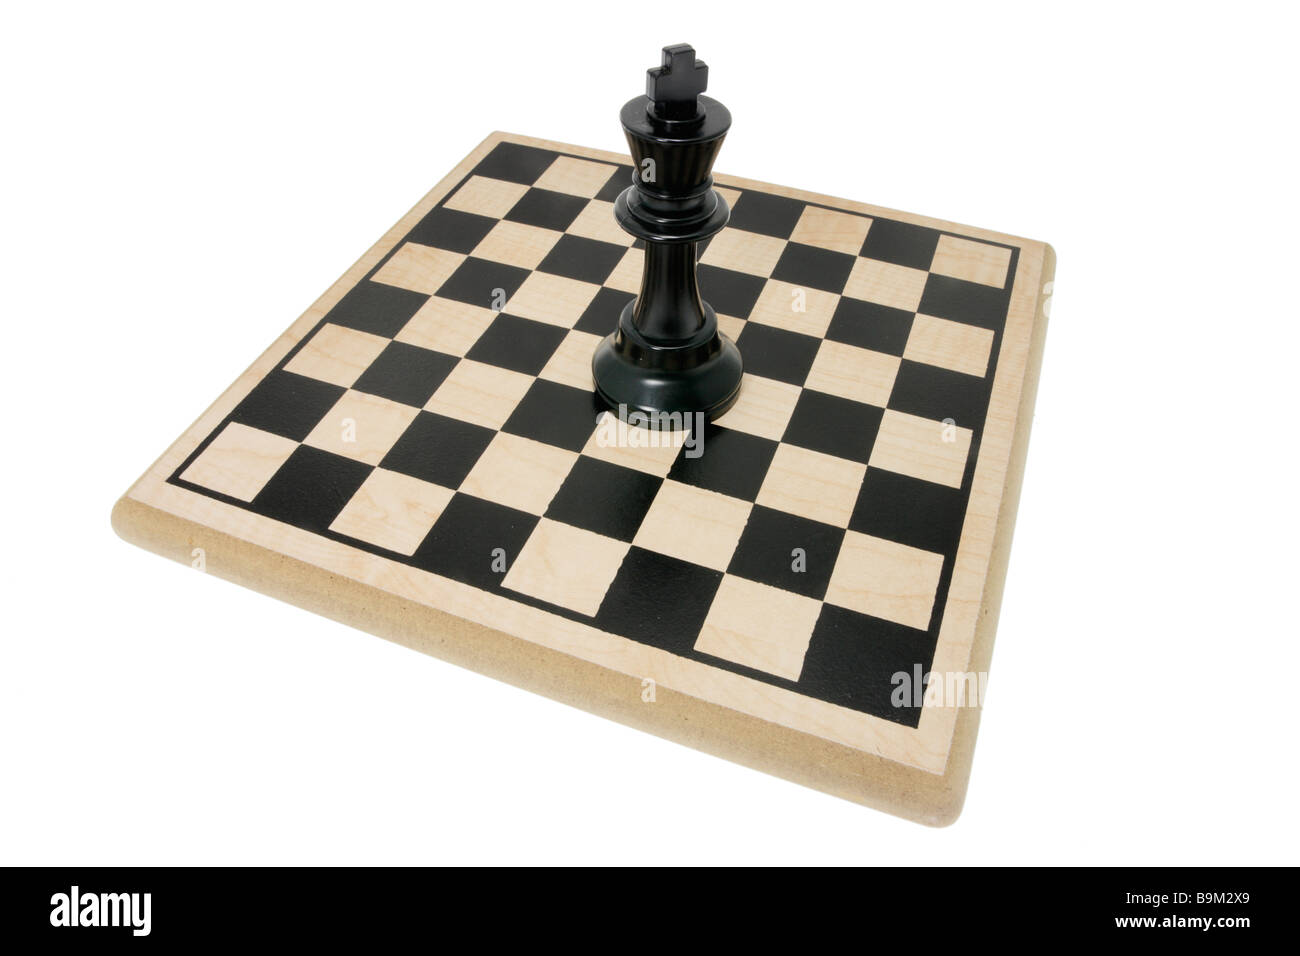 King Chess Piece sur Chess Board Banque D'Images